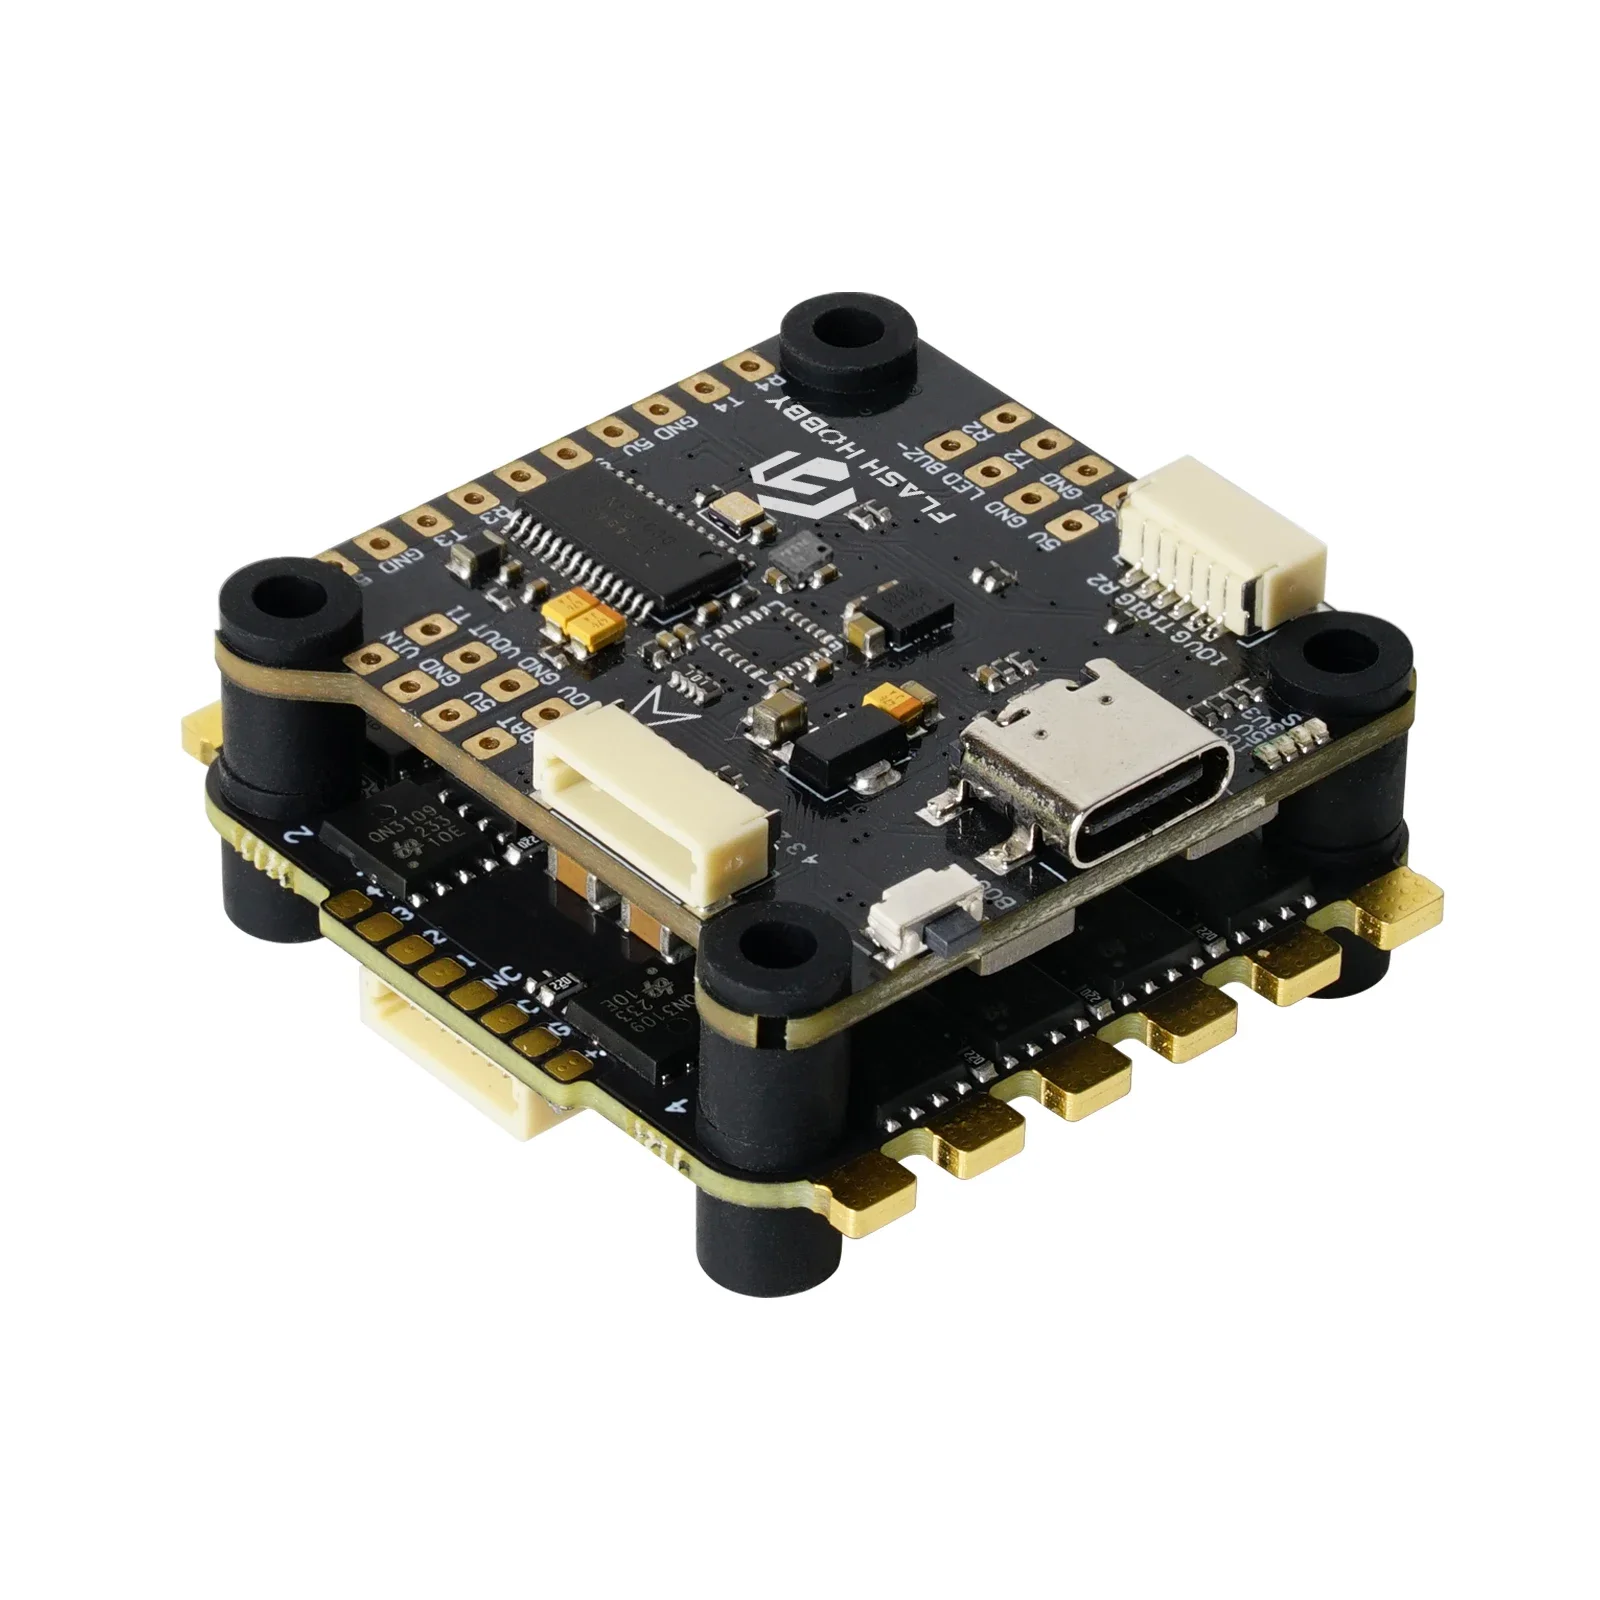 

FLASHHOBBY F722 60A Stack MPU6000 F722 Flight Controller BLHELI_S 60A 4in1 ESC 3-6S 30X30mm for FPV Freestyle Drones